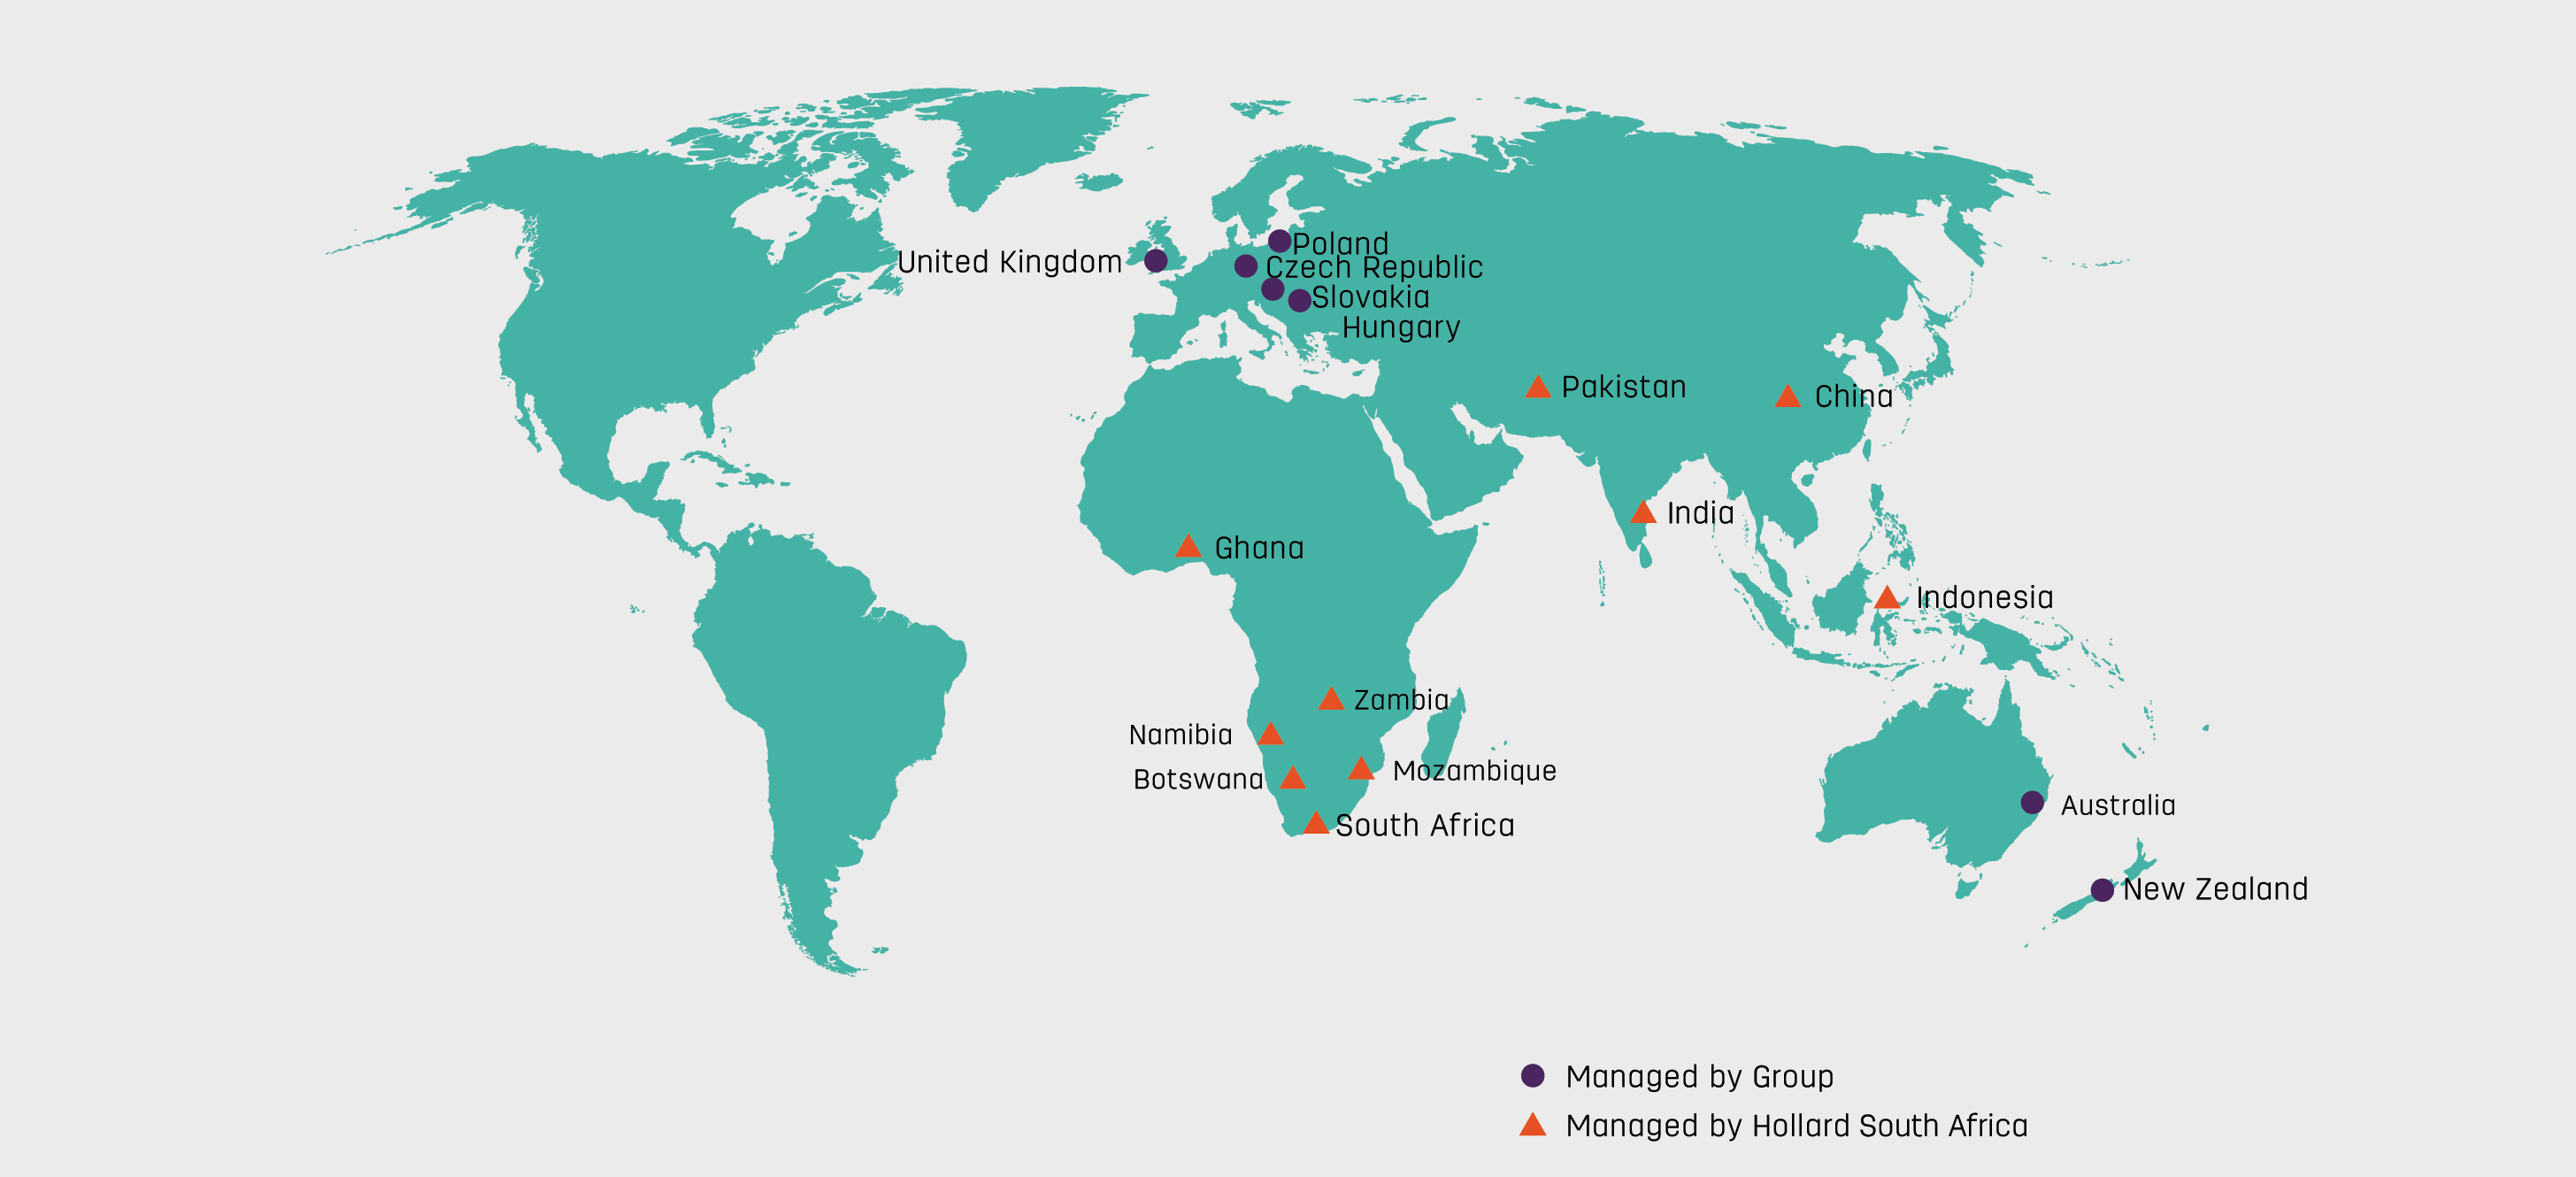 The map on the page is a representation of Hollard related business around the world